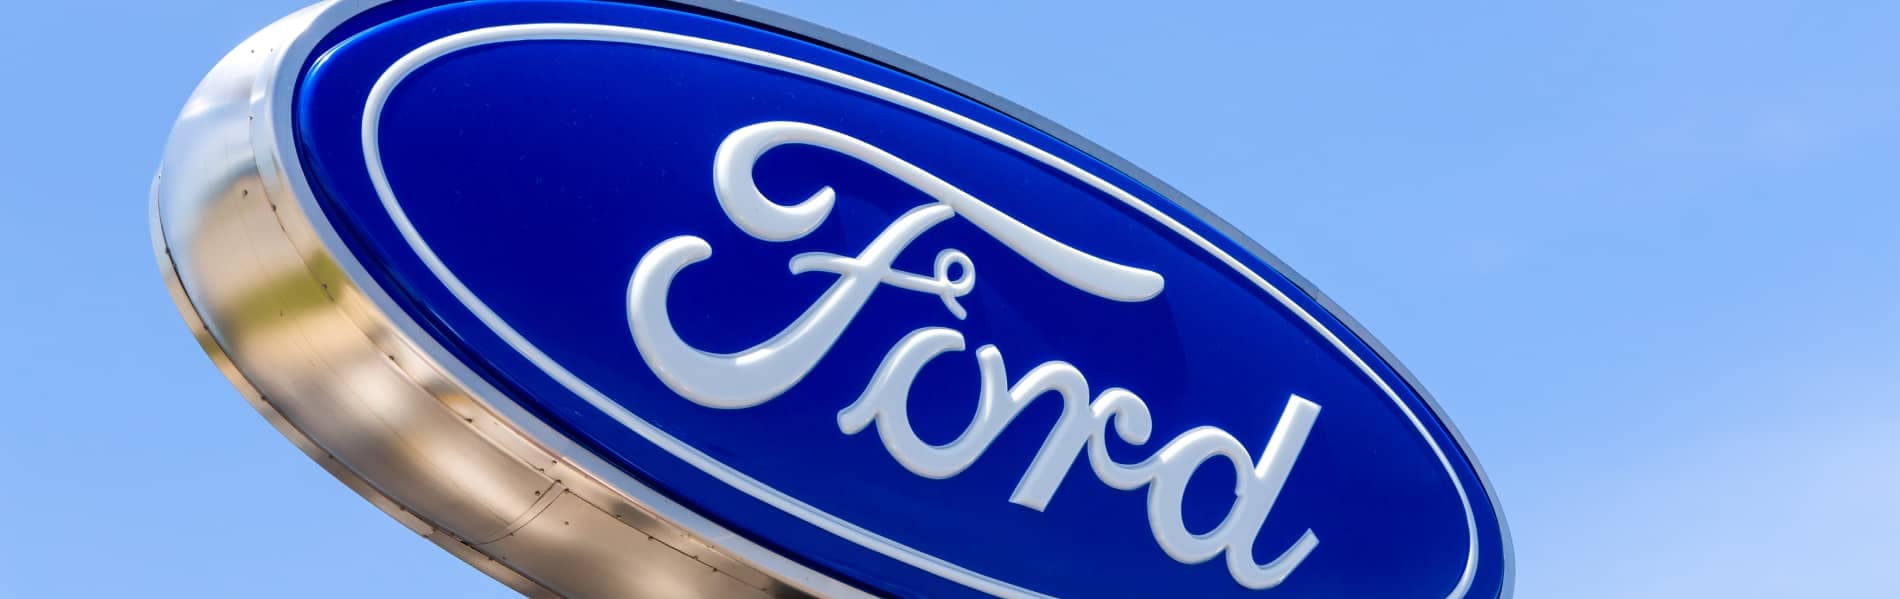 Ford sign with a background of the sky